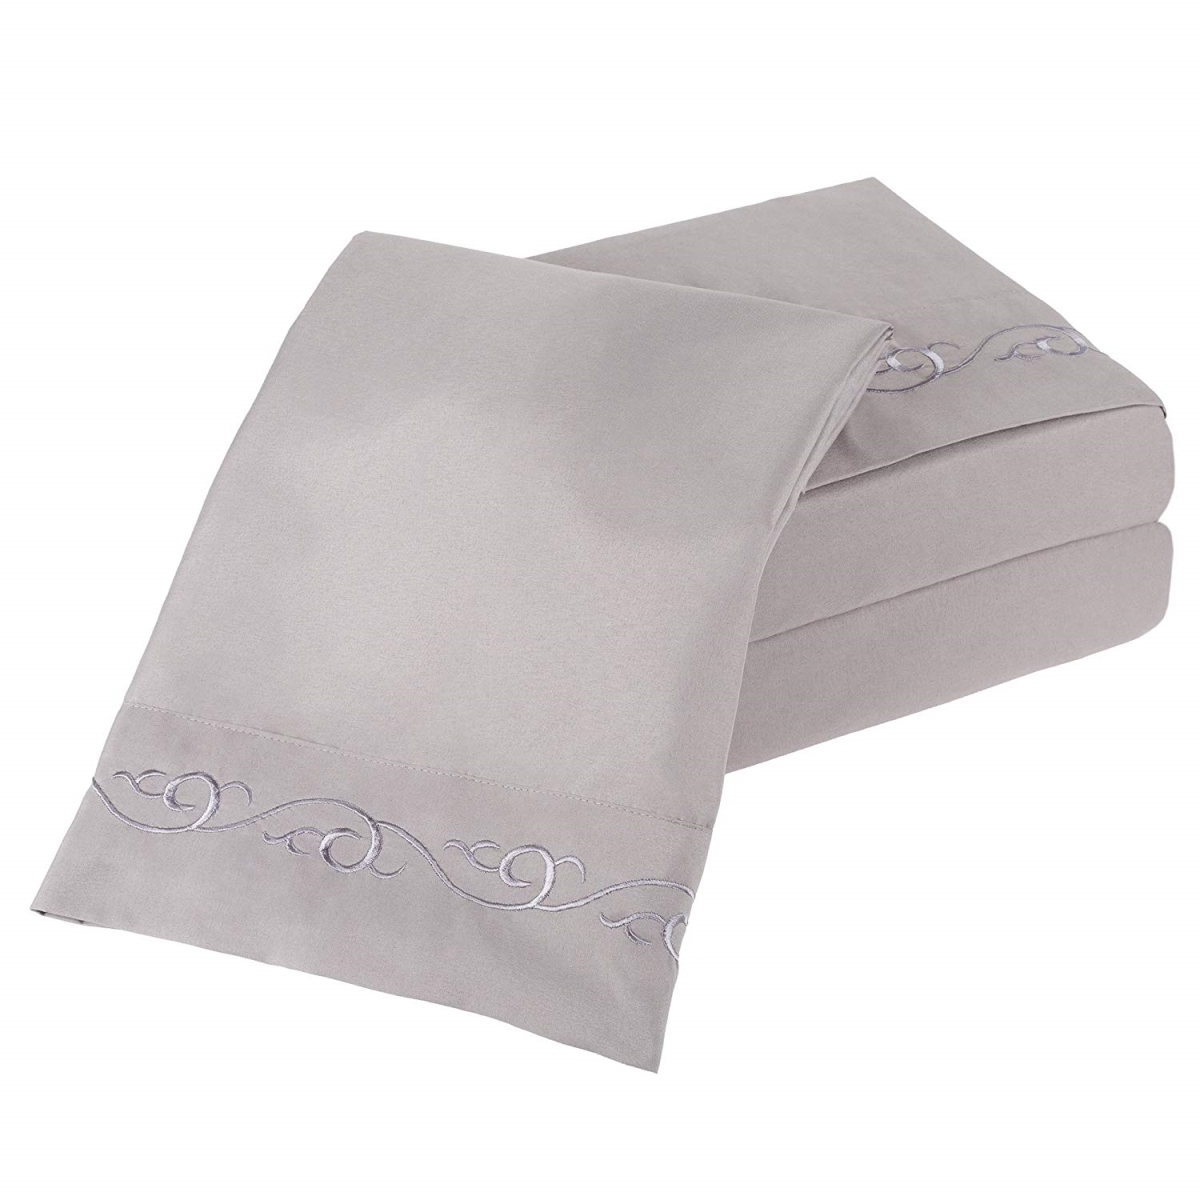 61a-17507 Embroidered Brushed Microfiber Sheets Set, Queen Size - Silver - 4 Piece